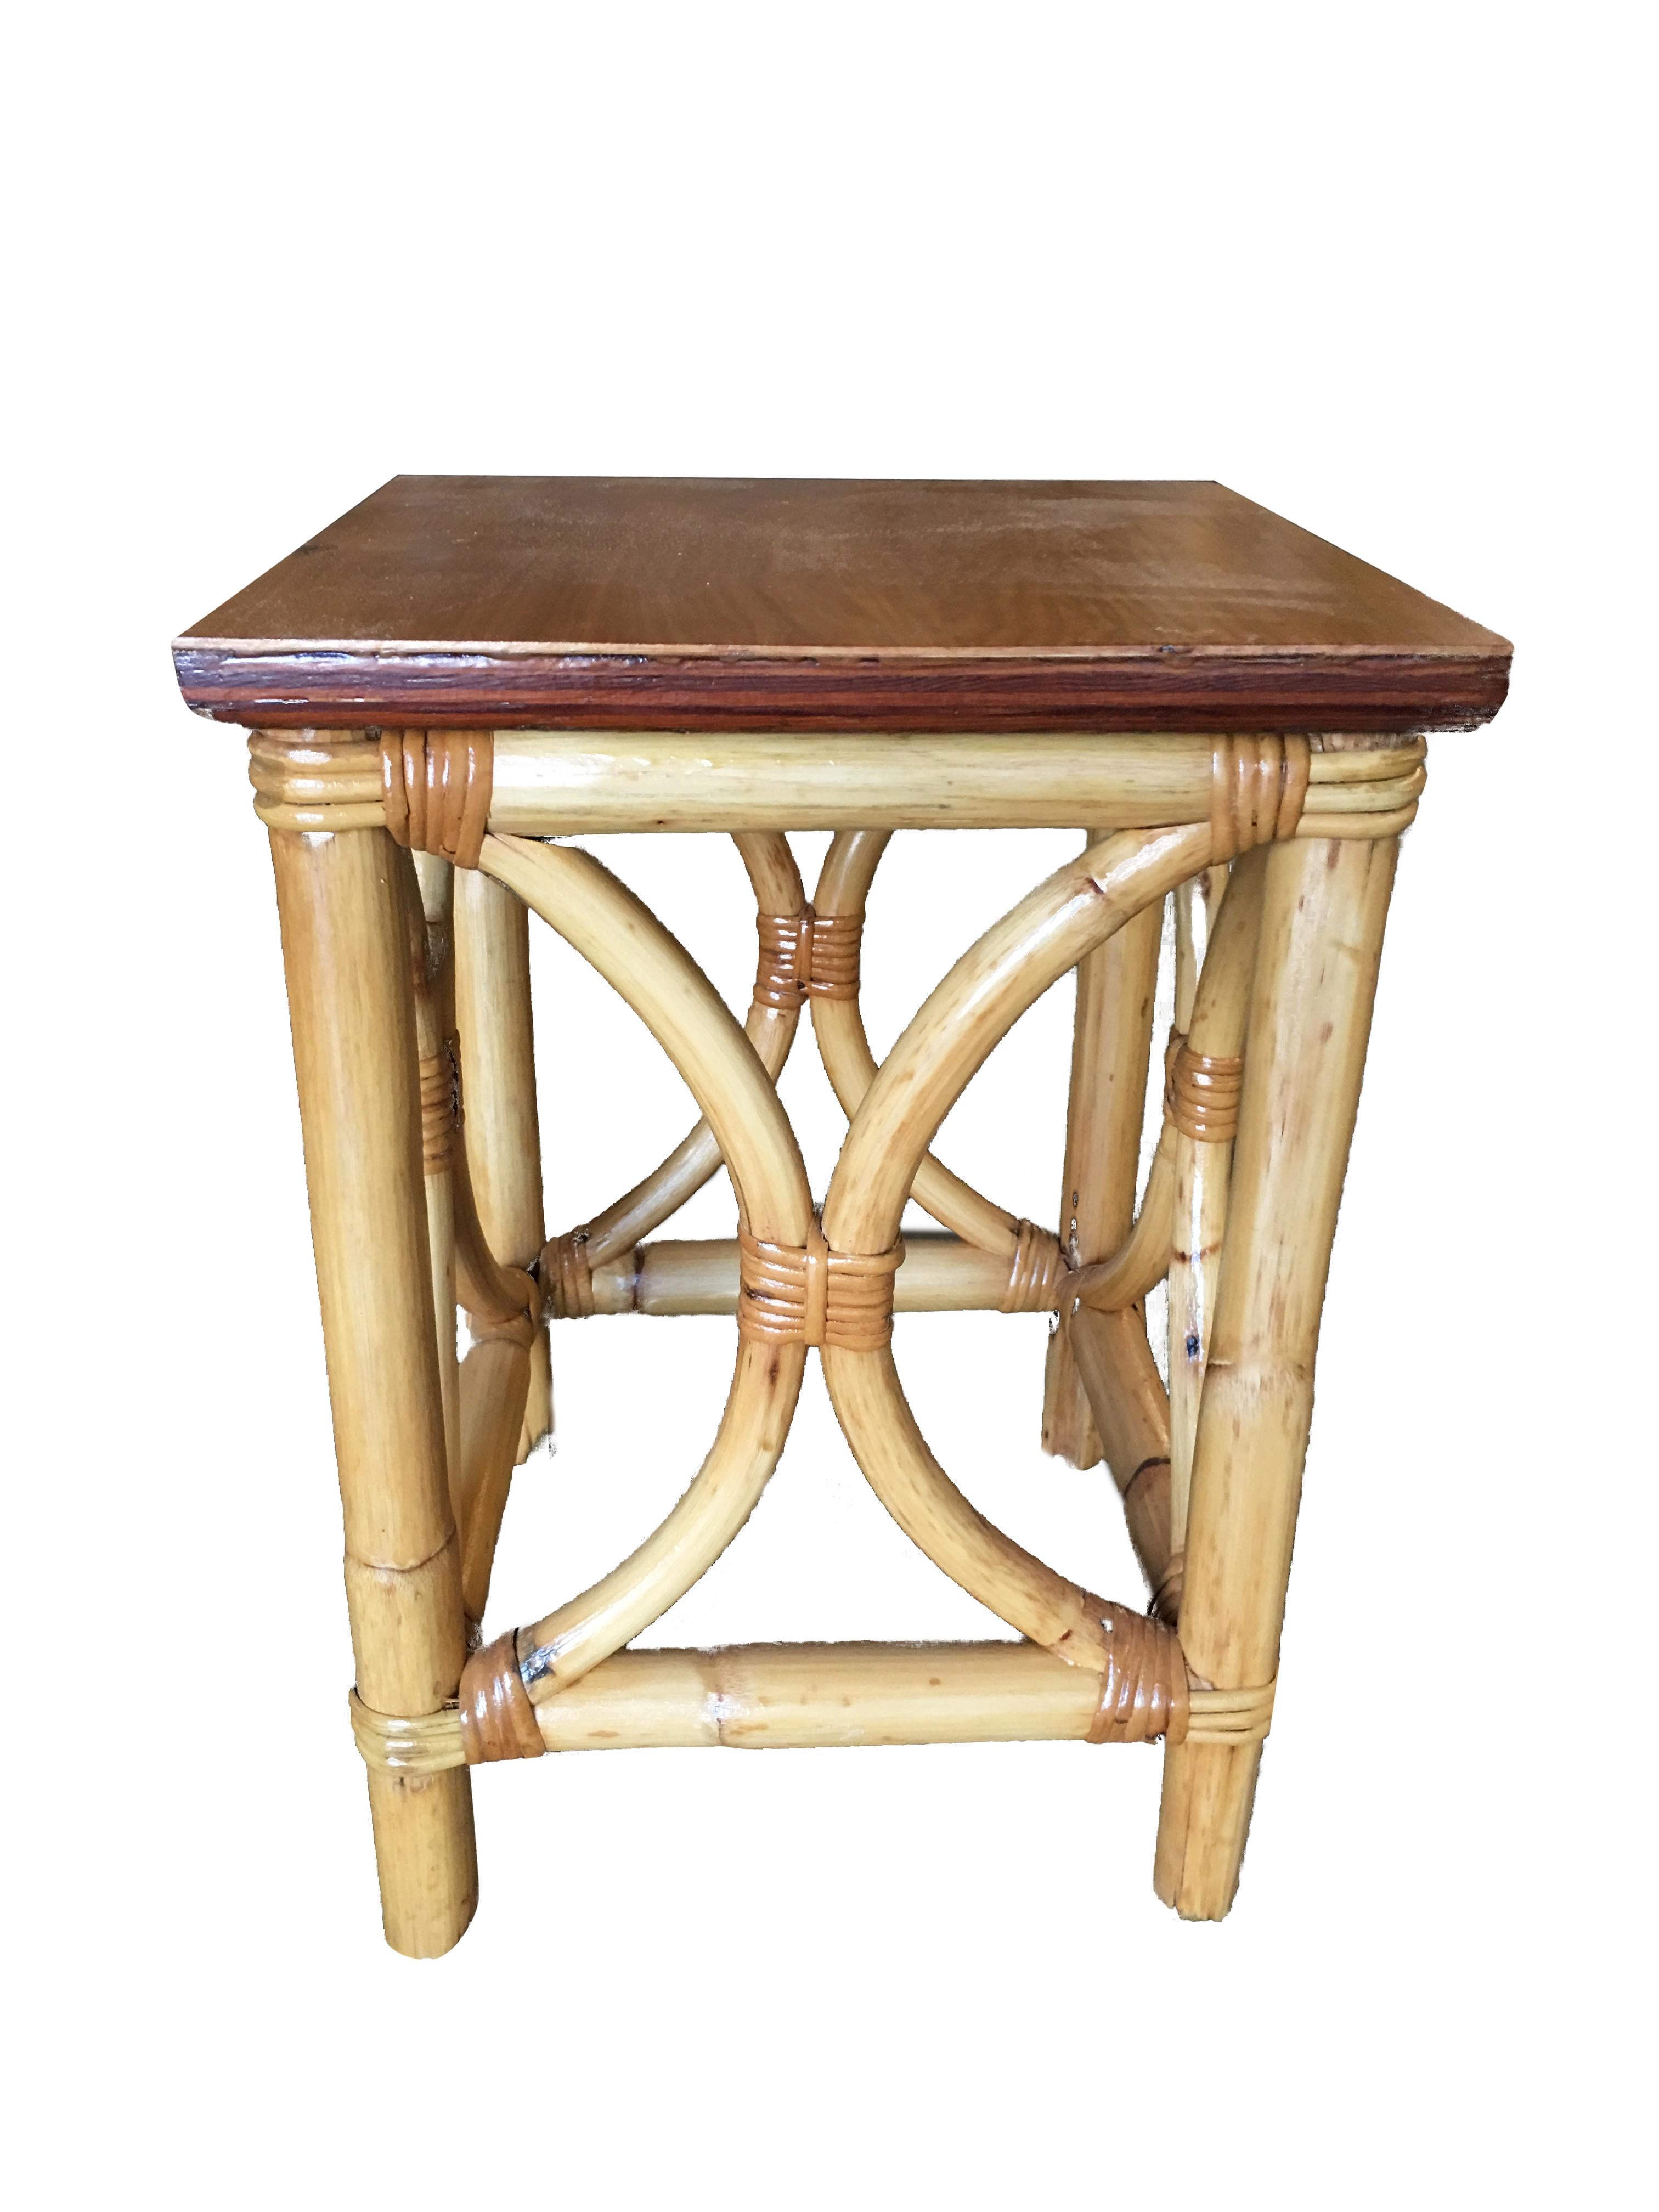 This mid-century rattan square side table boasts a mahogany tabletop held by twin arch side rattan poles, evoking the style of Paul Frankl. Professionally restored in 2019, it combines timeless design with meticulous craftsmanship, offering a